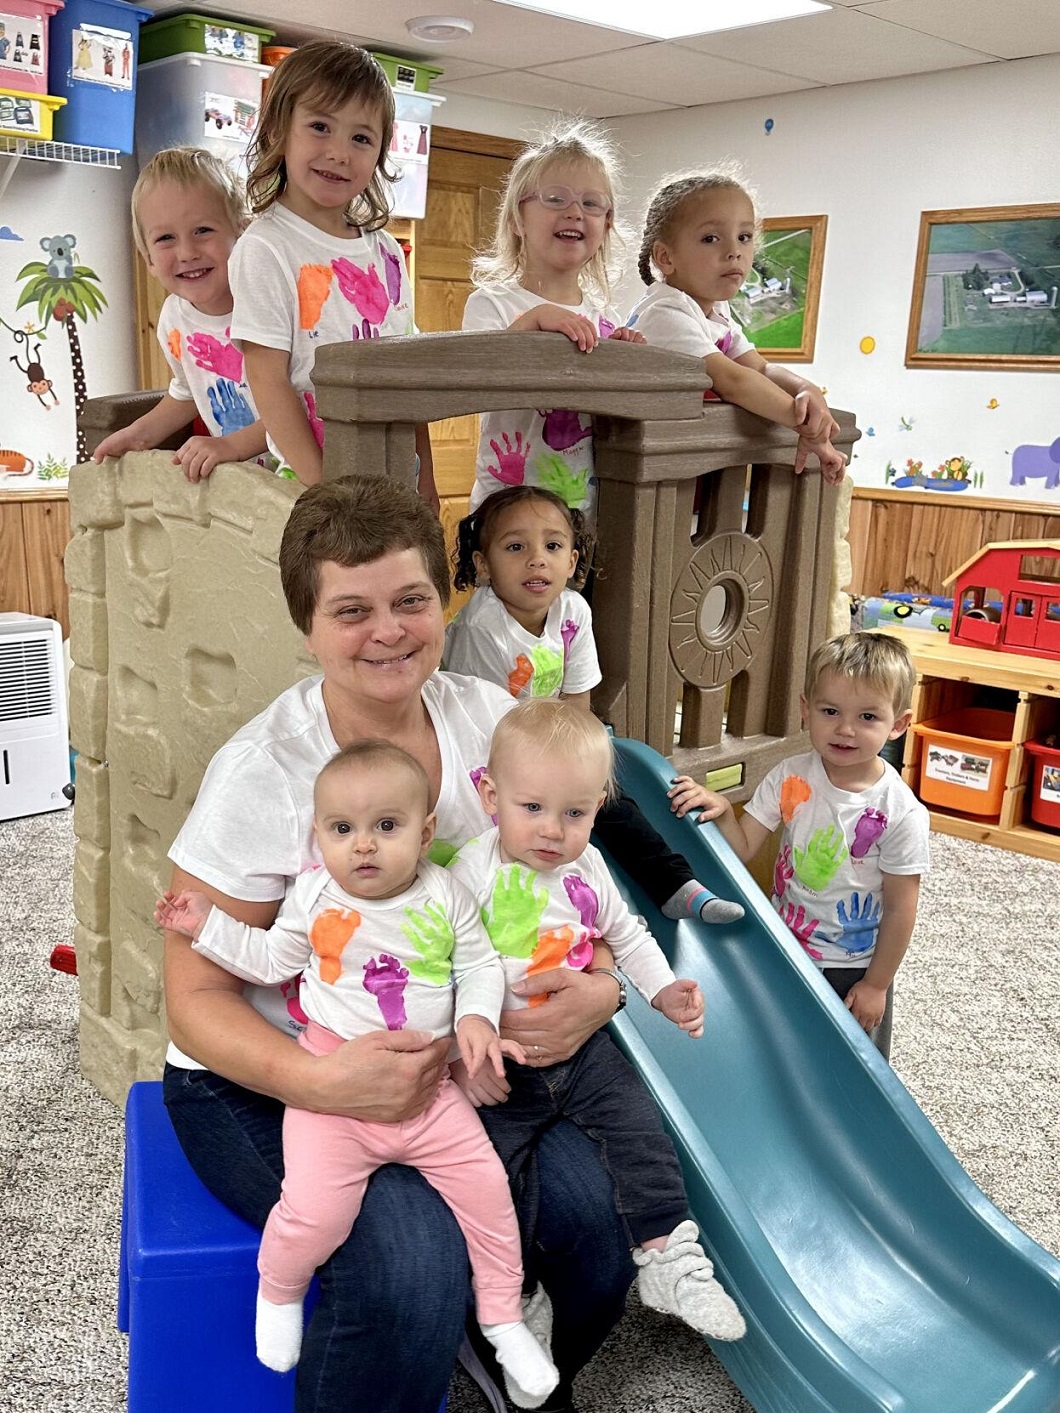 Patty Orth in Randall named ‘Child Care Provider of the Year’ Photo